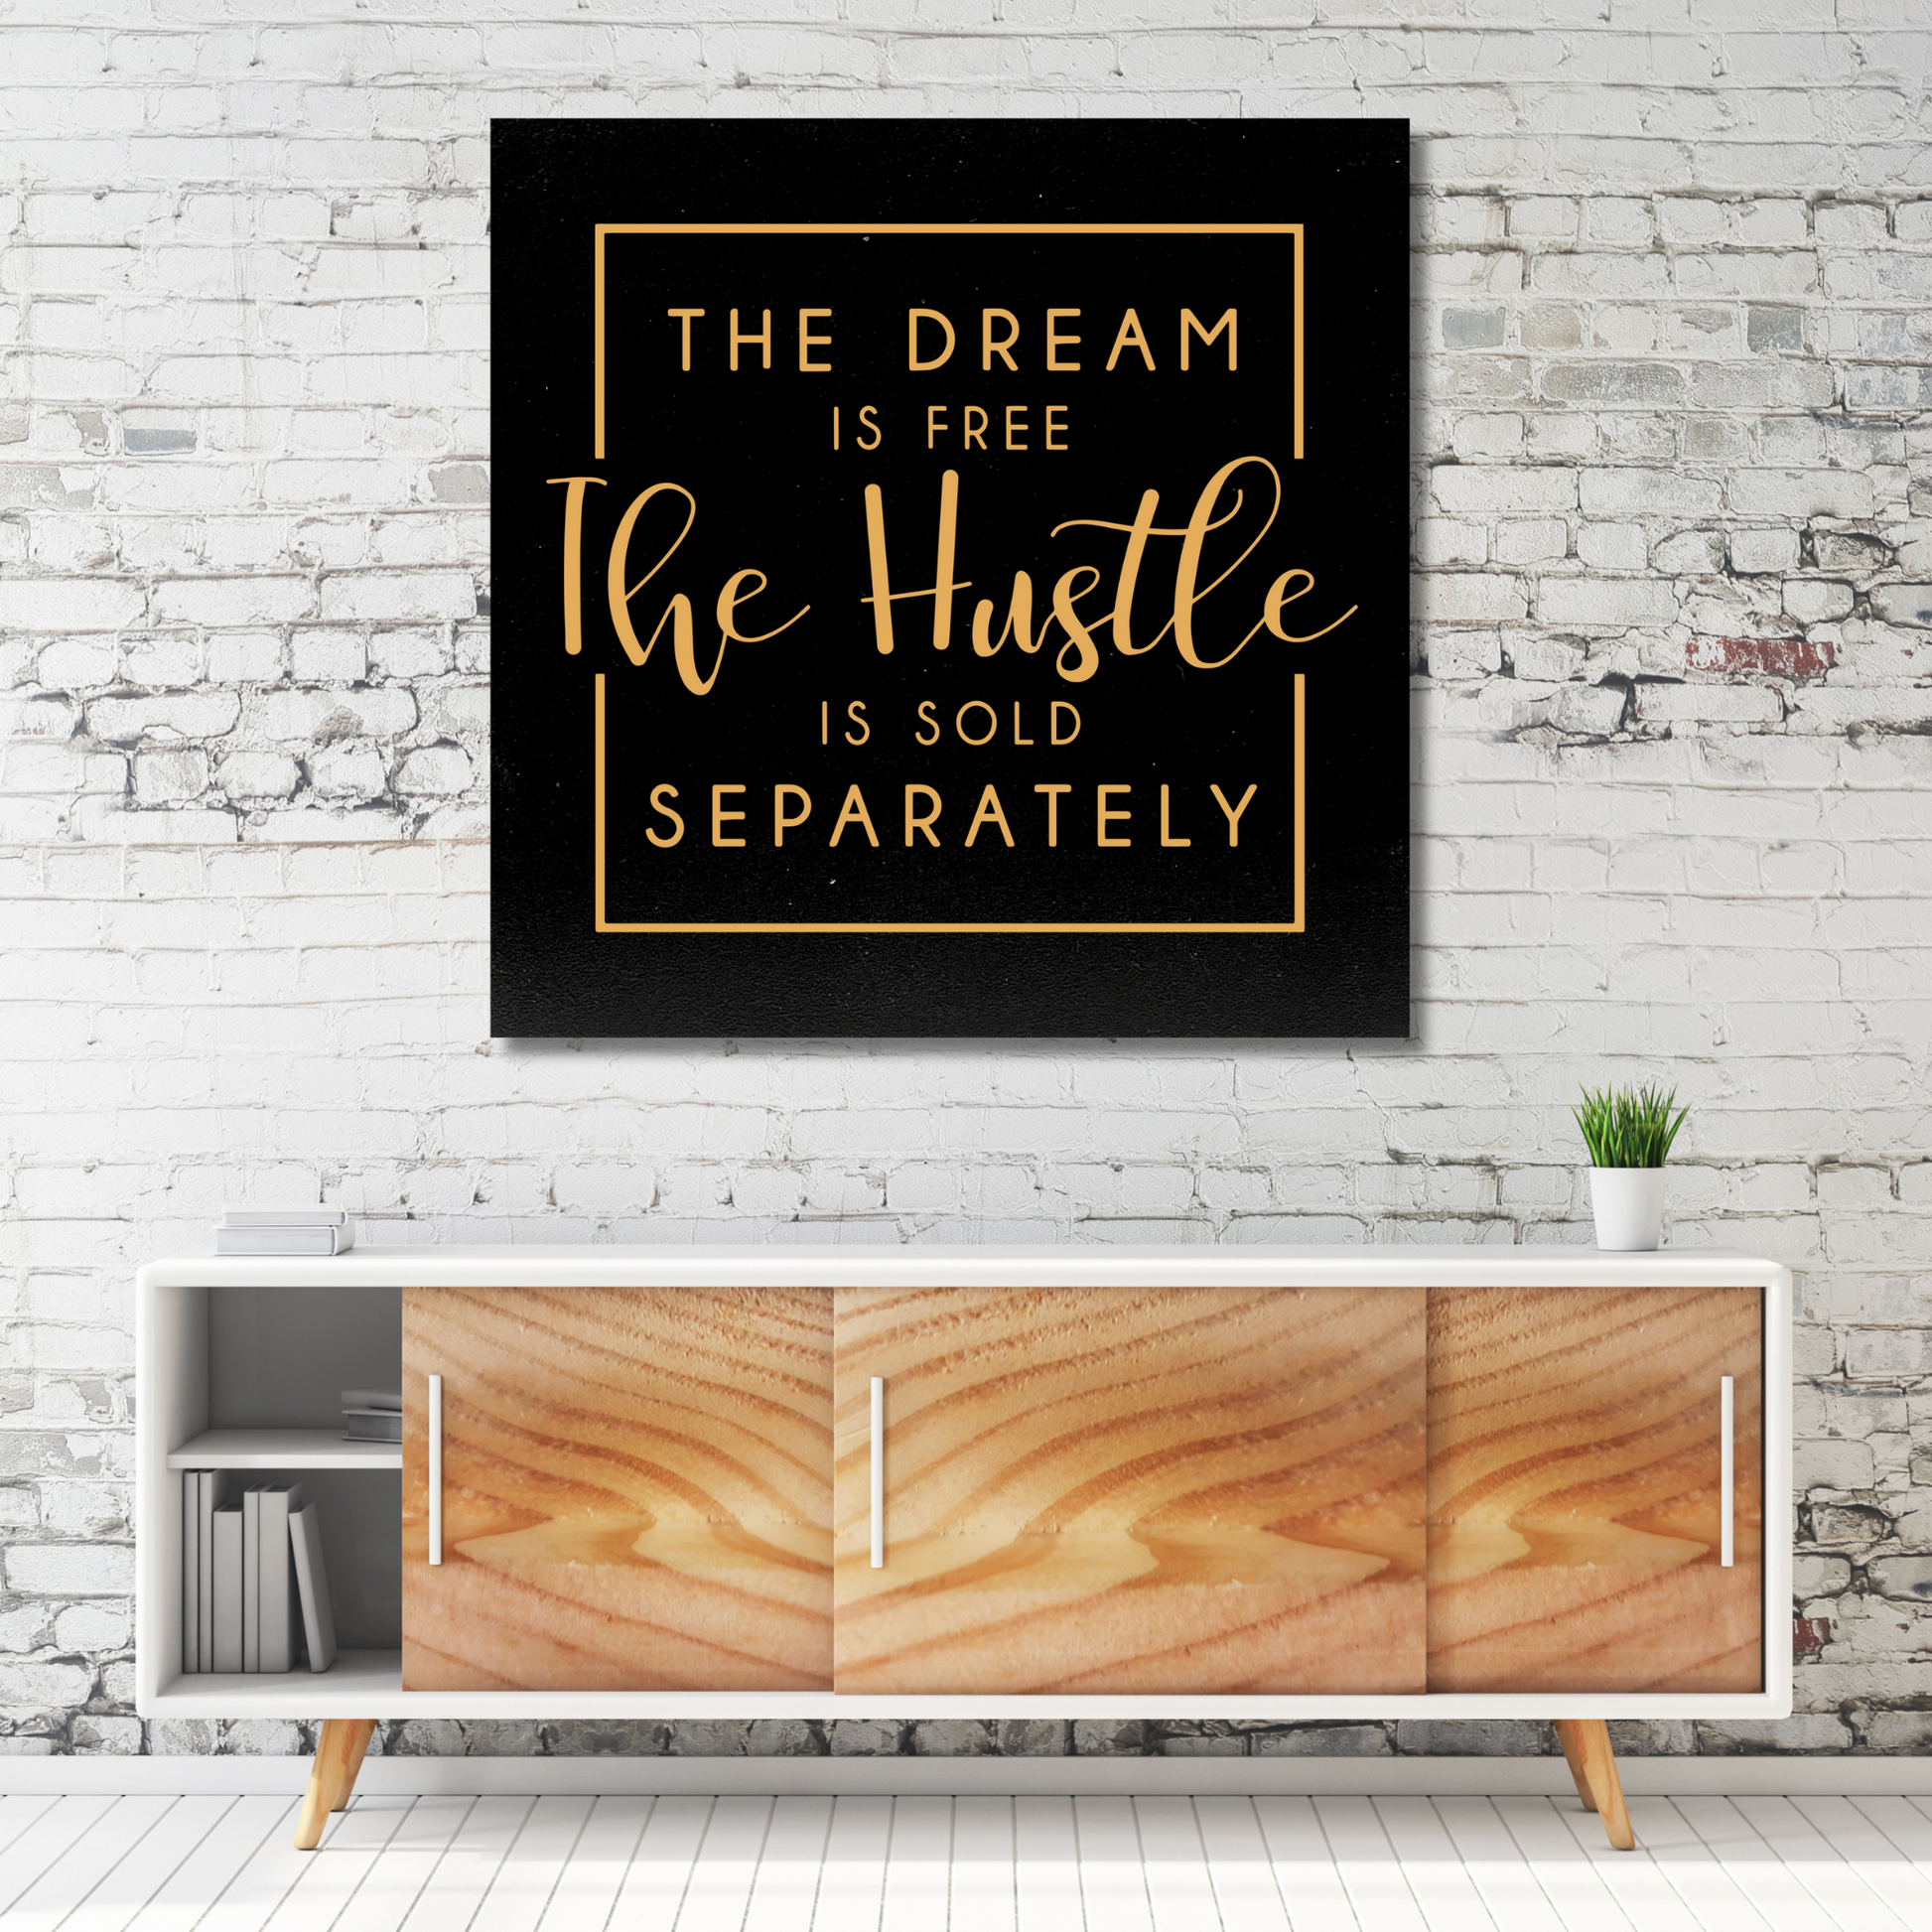 The Dream is Free The Hustle is Sold Separately Motivational Quote